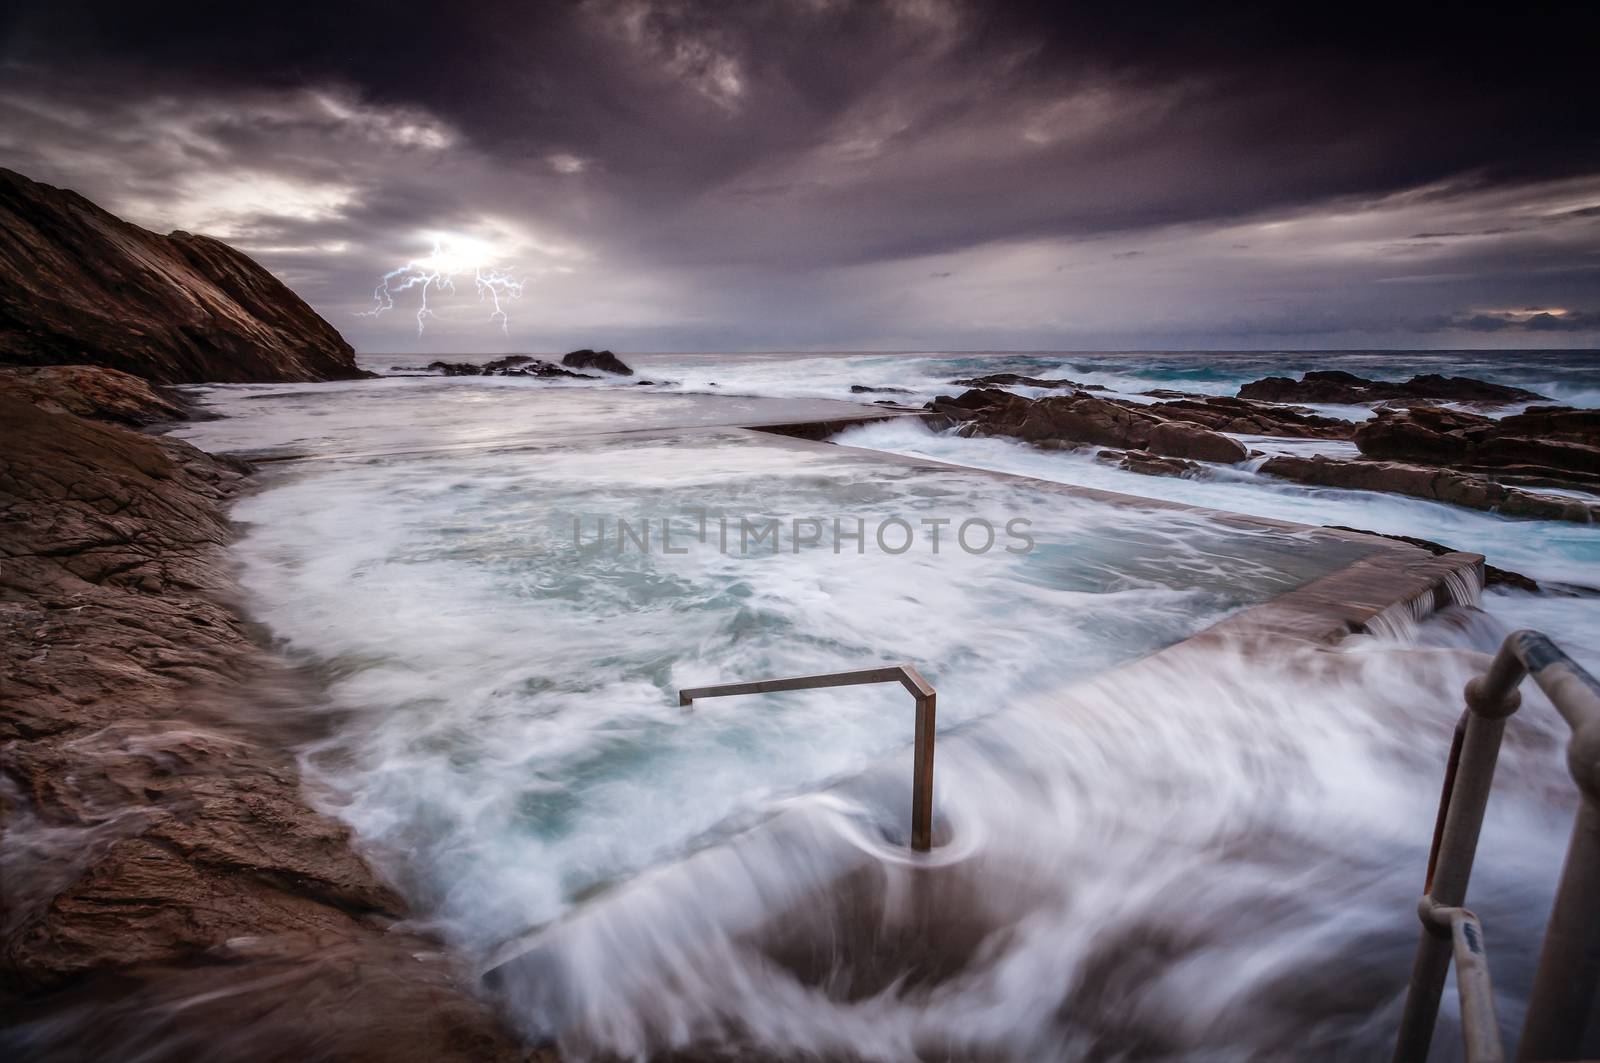 Turbulent ocean, big swell and surging rock pool overflows by lovleah